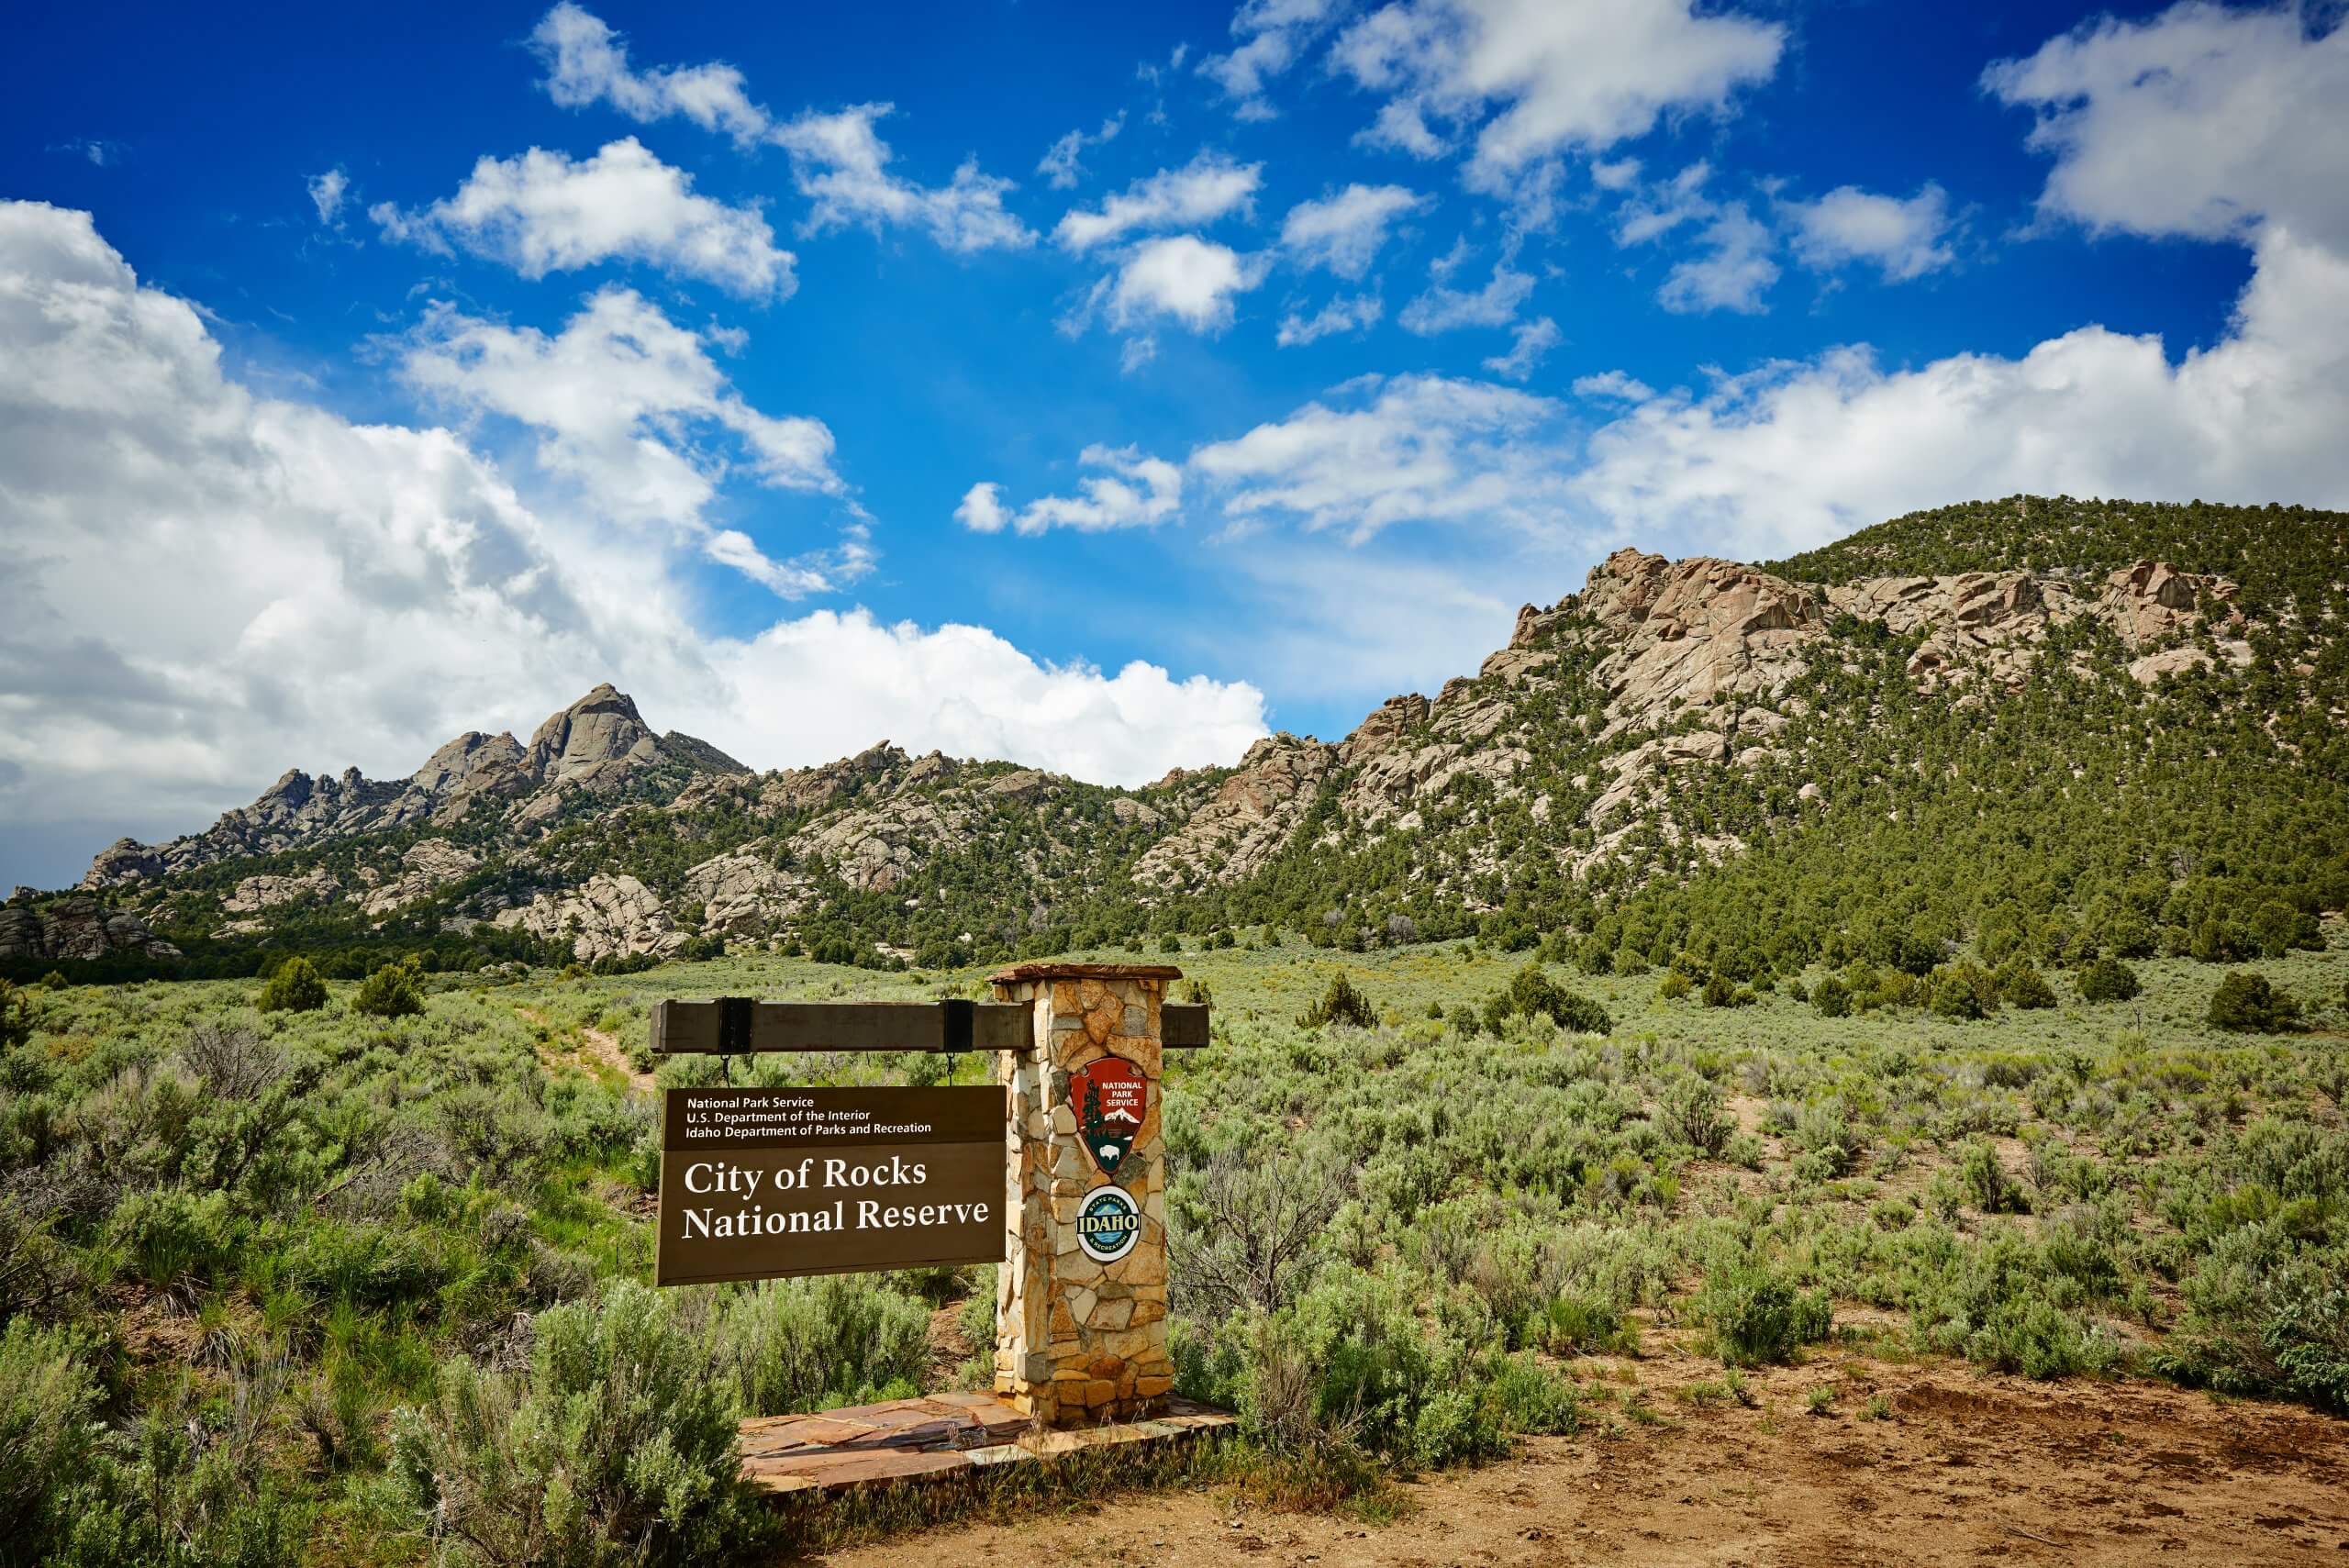 City of Rocks National Reserve signage sits in front of a mountain range.